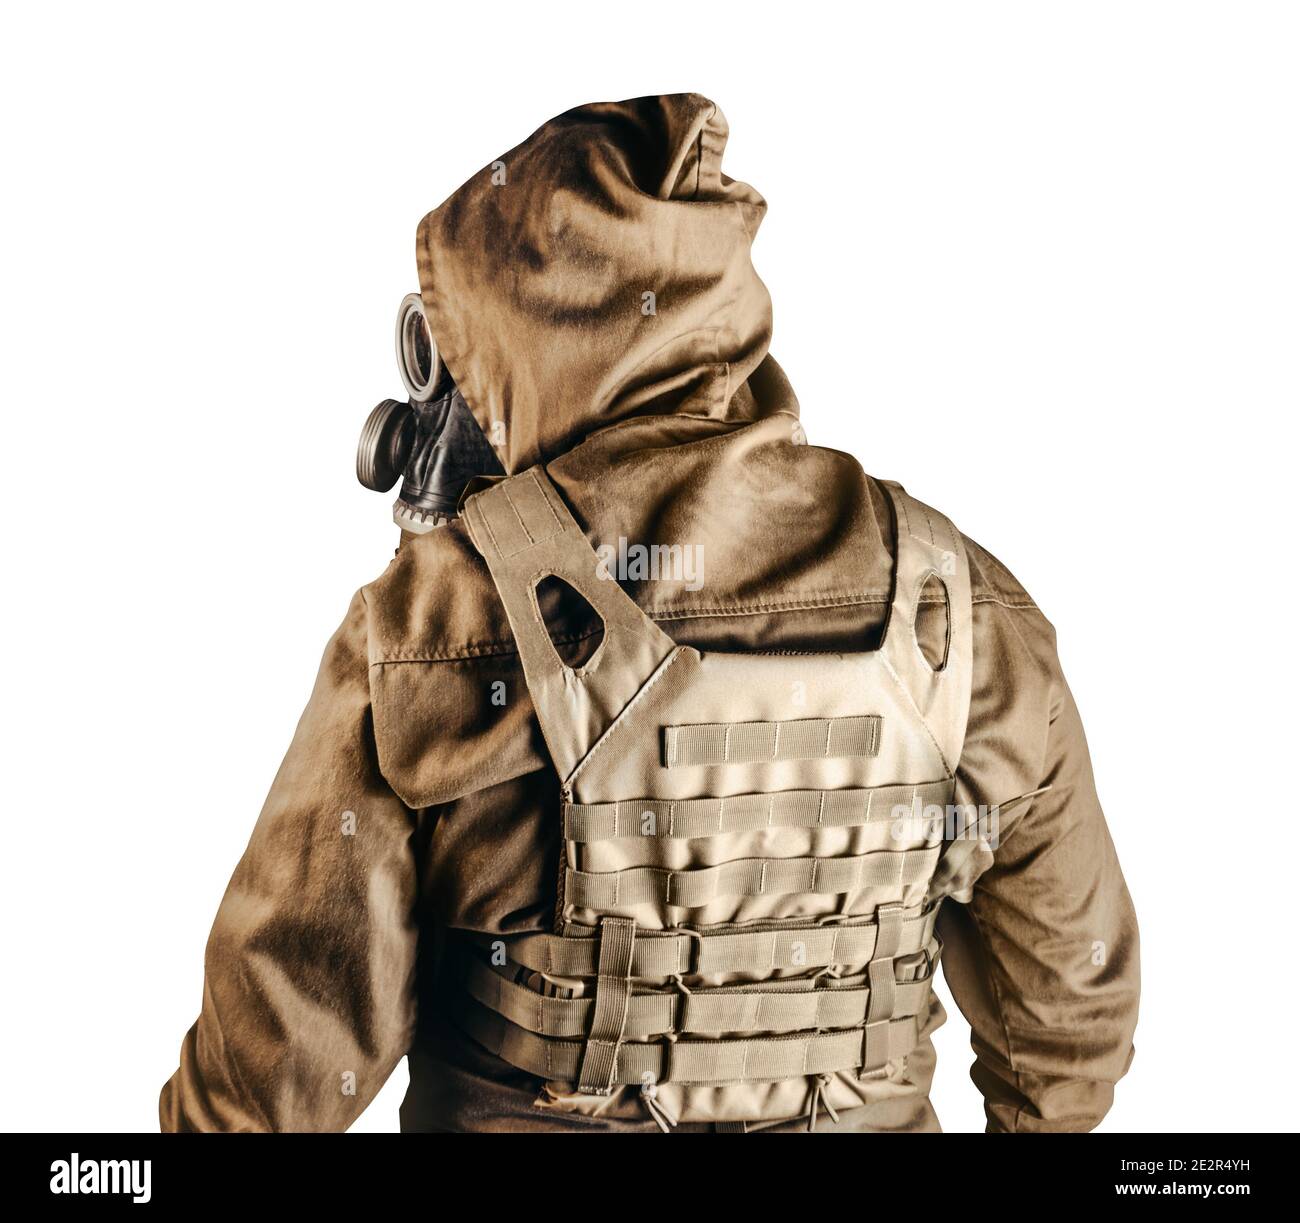 Isolated photo of a stalker in jacket, armored vest standing back view in  soviet gas mask with filter on white background Stock Photo - Alamy